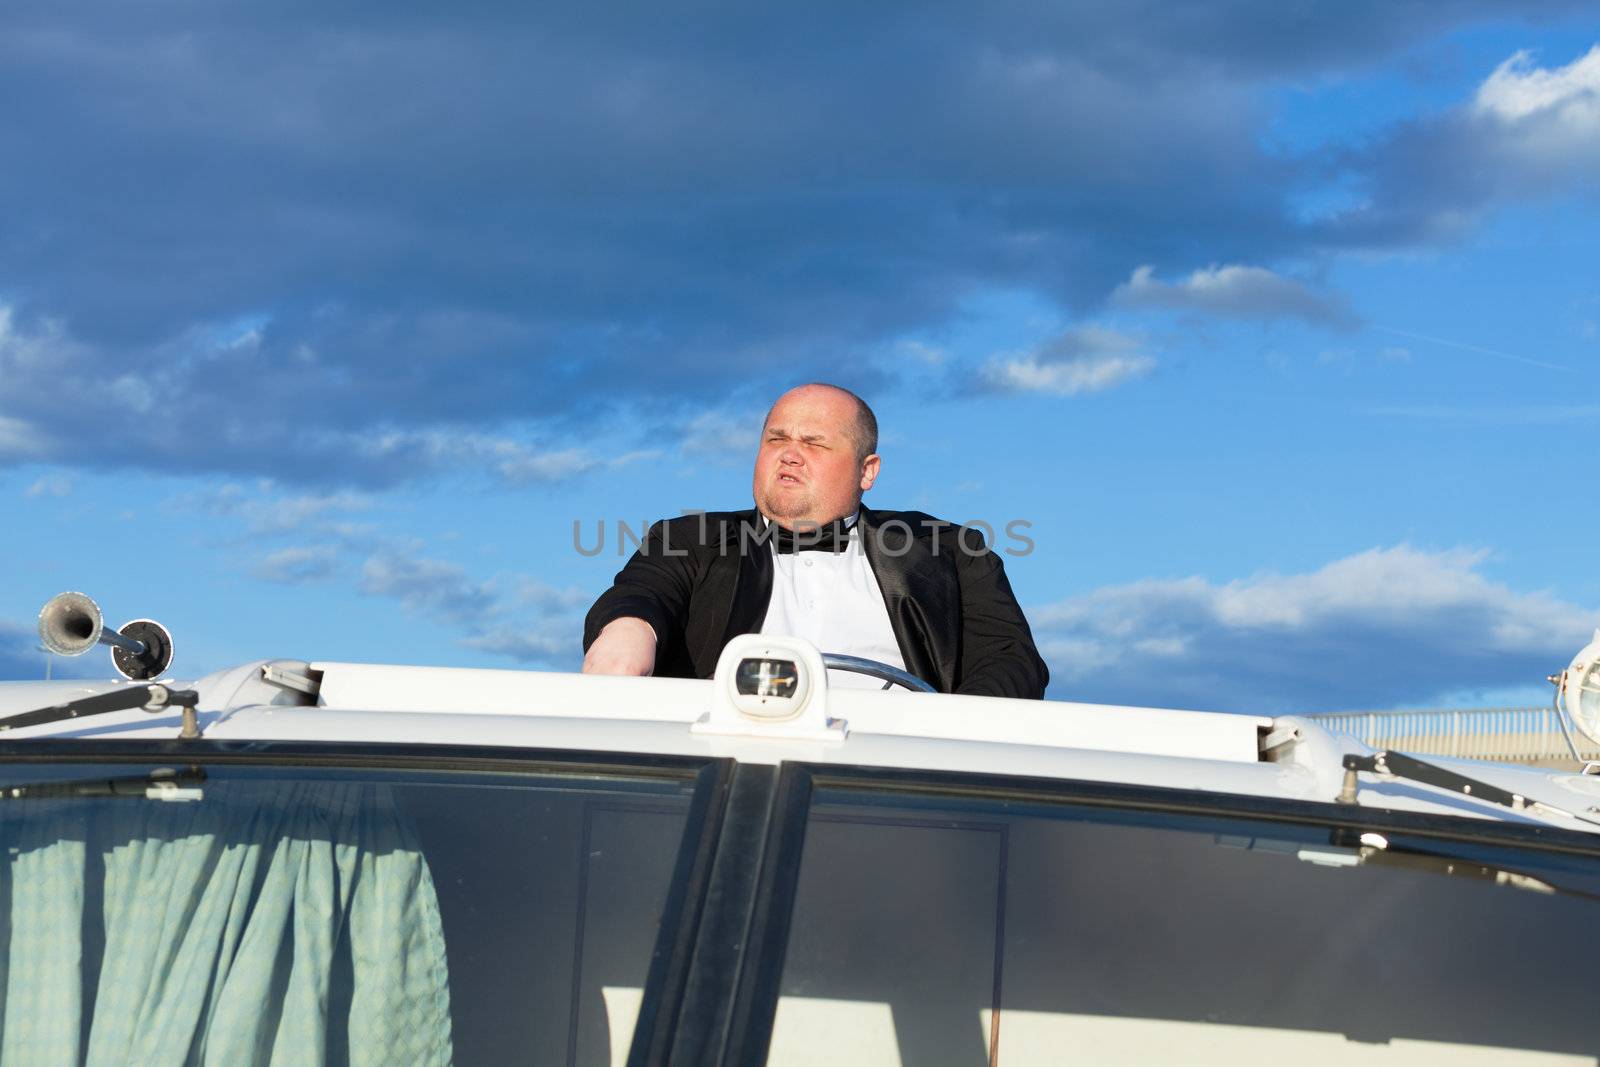 Overweight man in a tuxedo at the helm of a pleasure boat, closeup